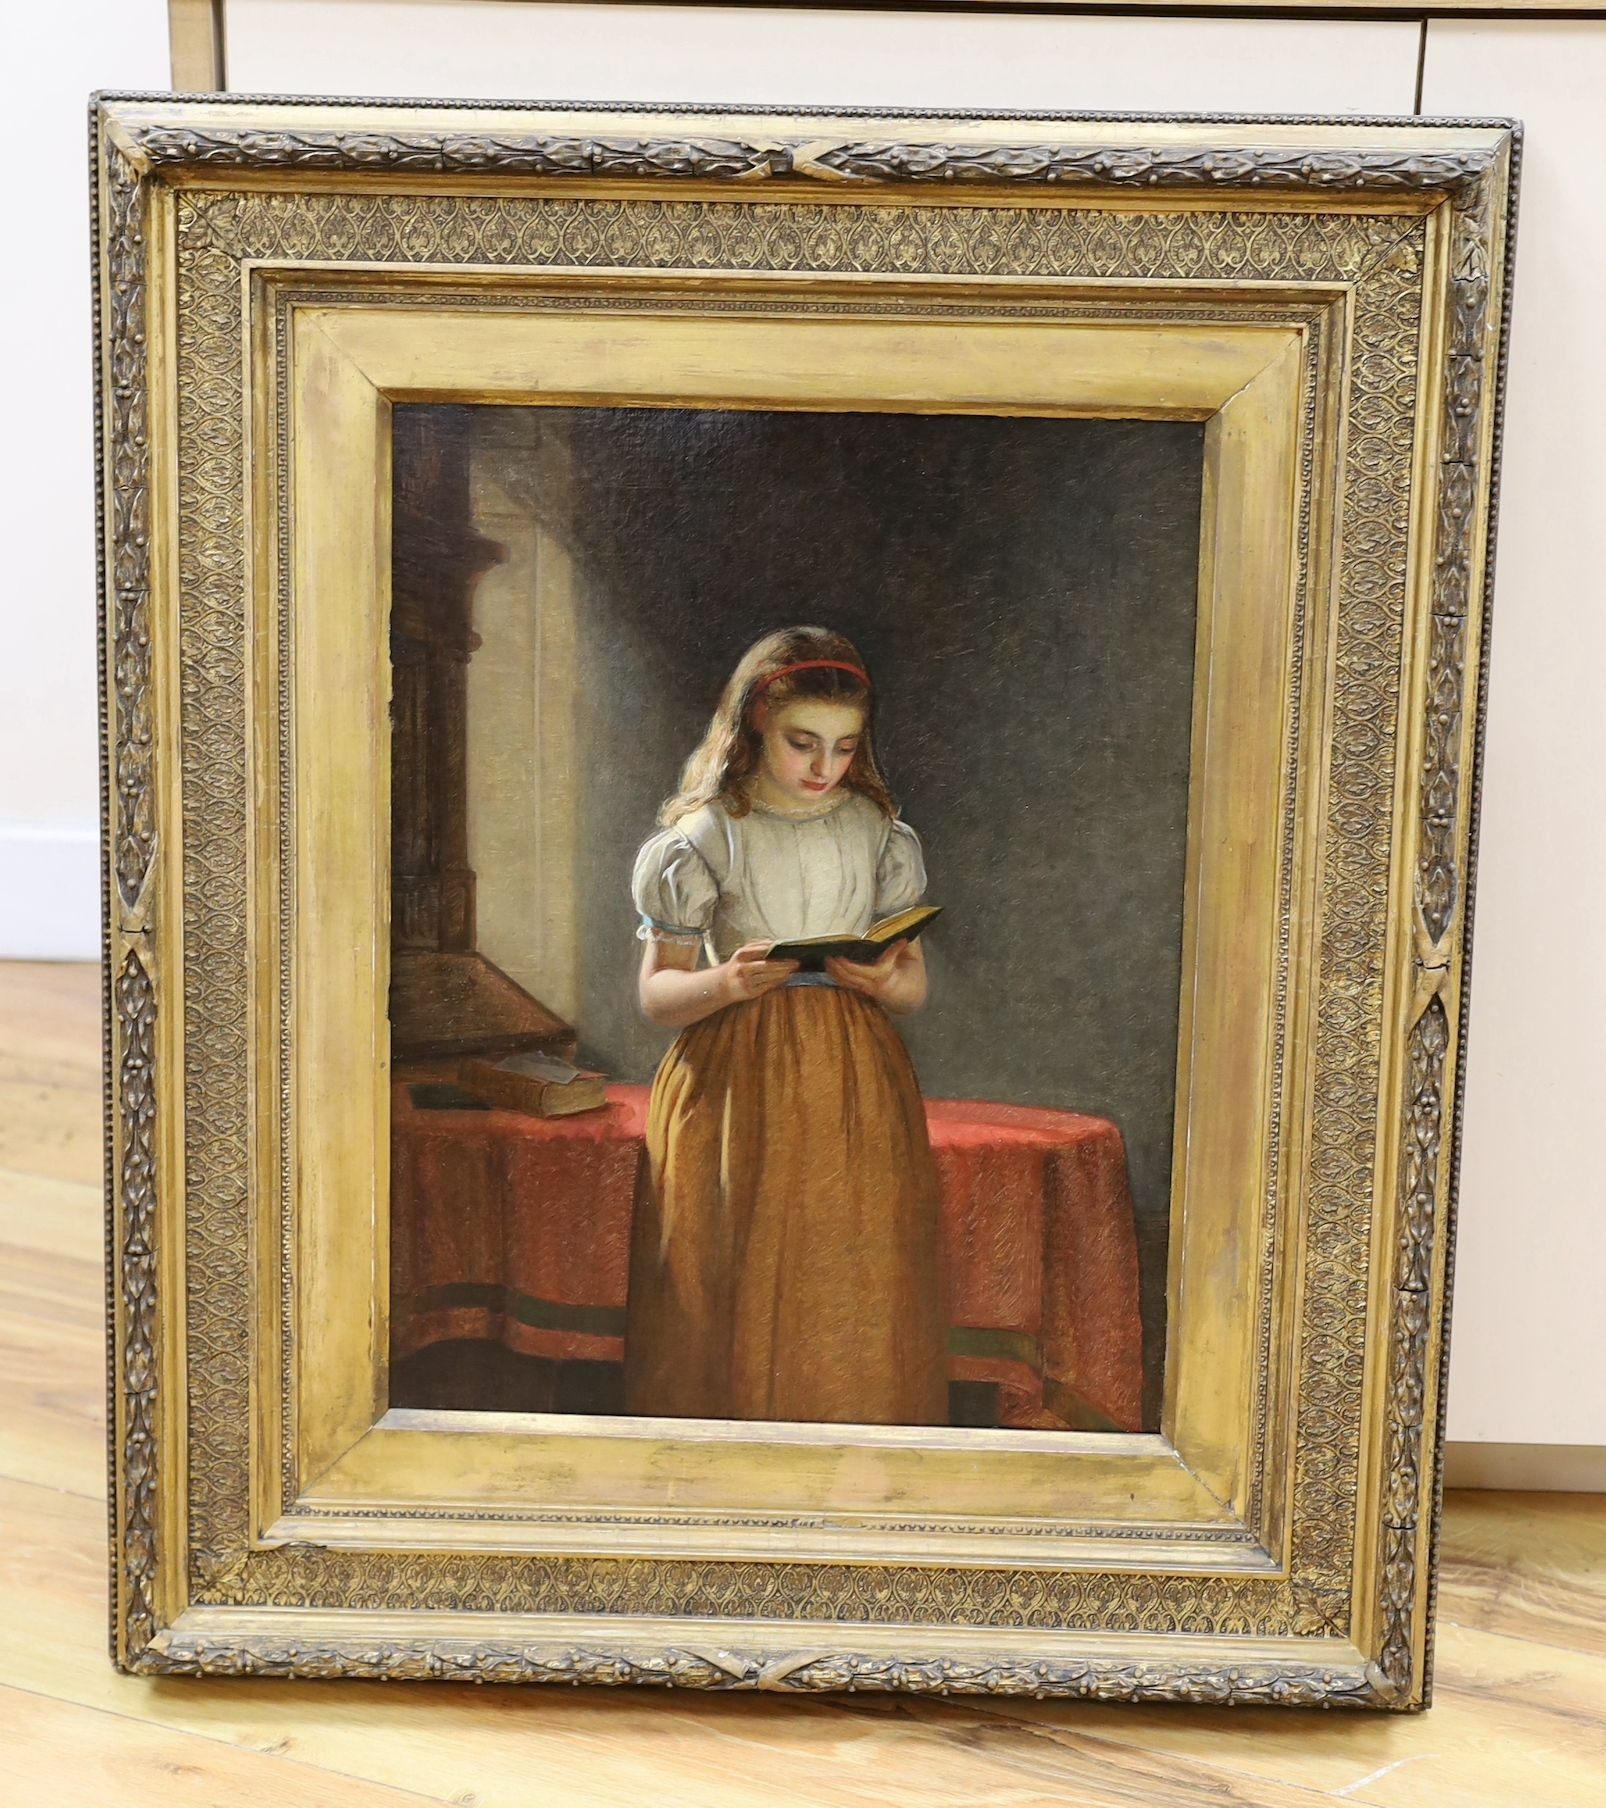 Richard Crafton Green (1848-1934), oil on canvas, Young girl reading, signed and dated 1877, label verso, 45 x 34cm